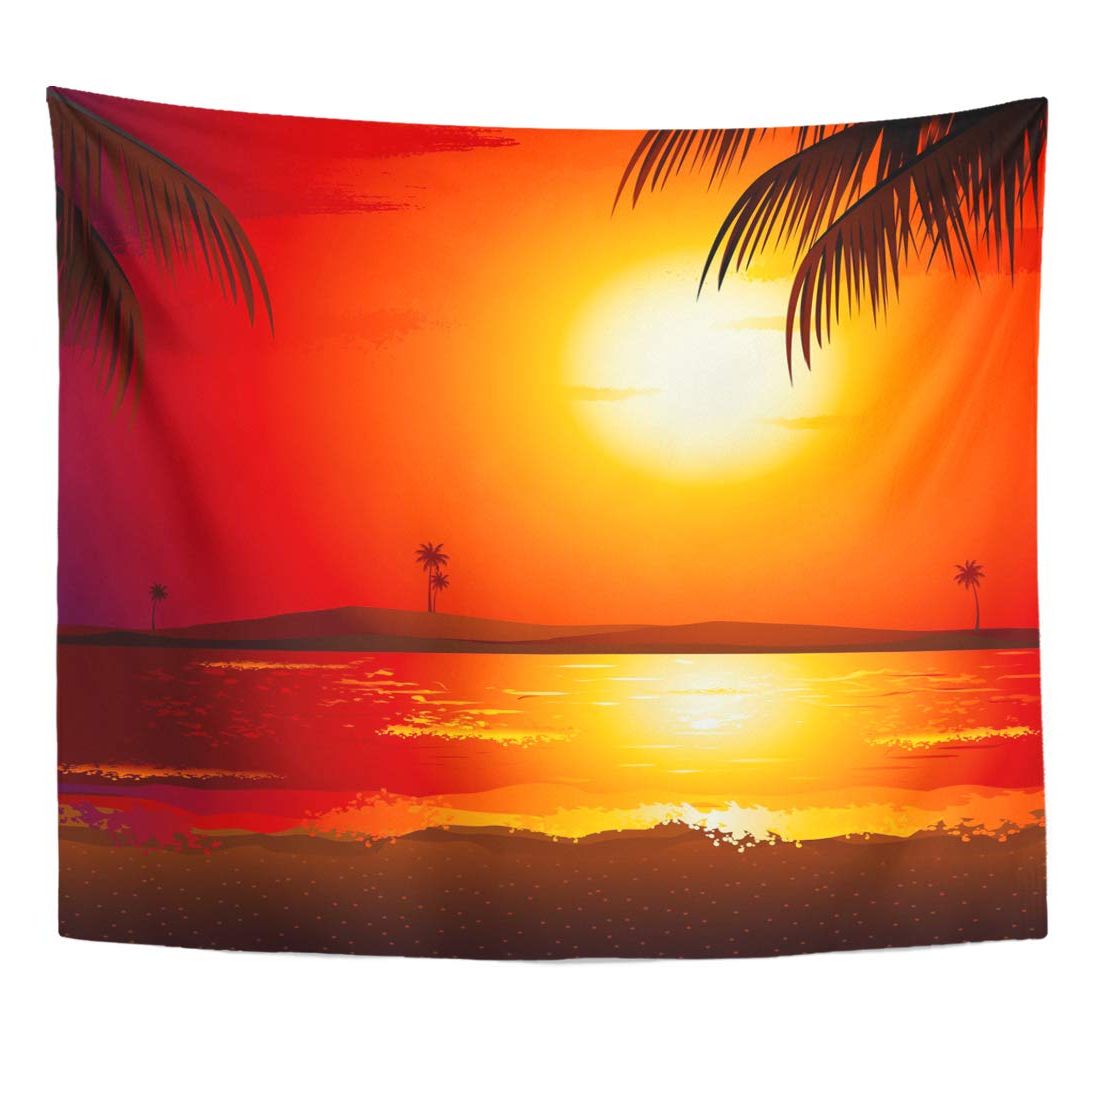 Zealgned Evening Tropical Sunset View In Beach With Palm Tree Sea Scene  Scenery Wall Art Hanging Tapestry Home Decor For Living Room Bedroom Dorm  60x80 Inch – Walmart – Walmart Throughout Most Recent Tropical Evening Wall Art (View 15 of 15)